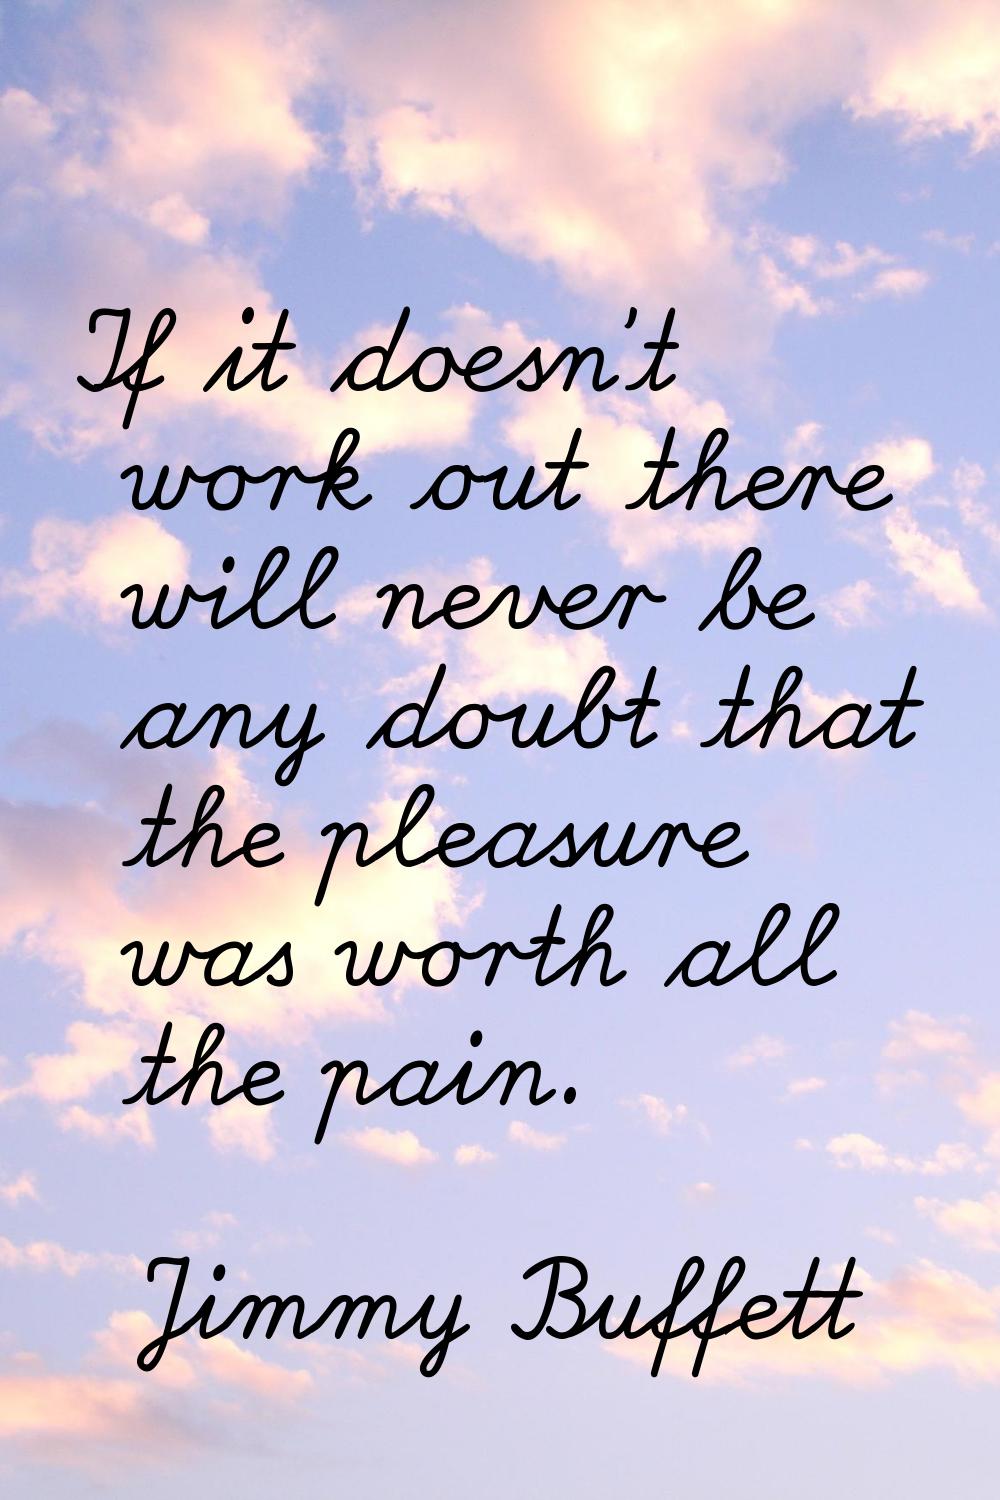 If it doesn't work out there will never be any doubt that the pleasure was worth all the pain.